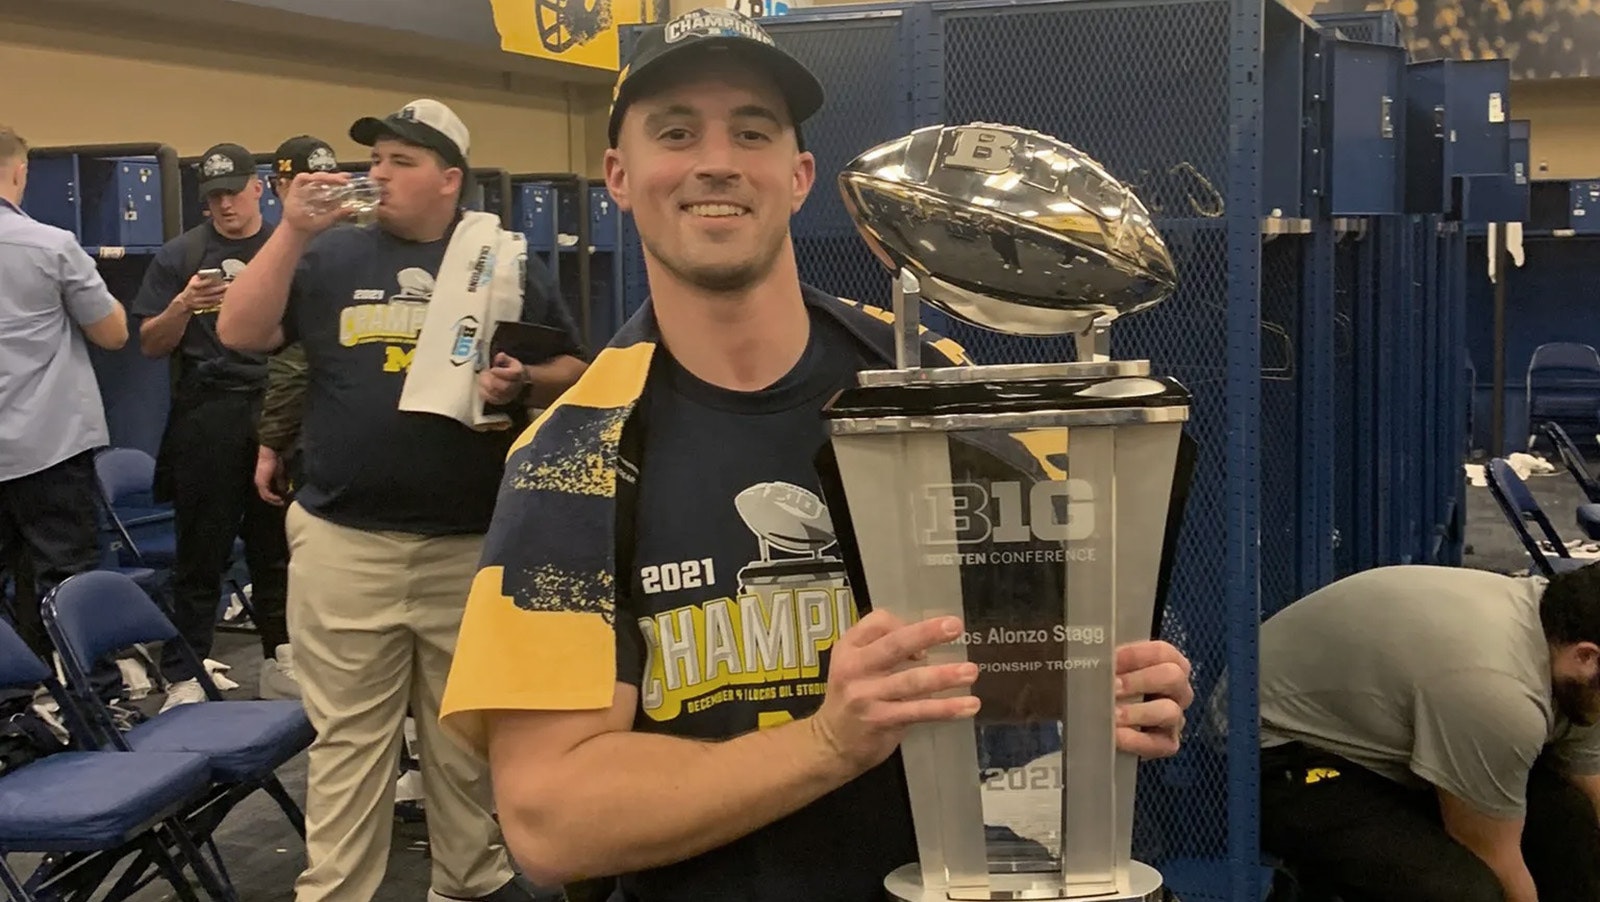 Connor Stalions, a coach on the University of Michigan football staff, is at the center of a sign-stealing cheating scandal and also seems to have a Wyoming connection.